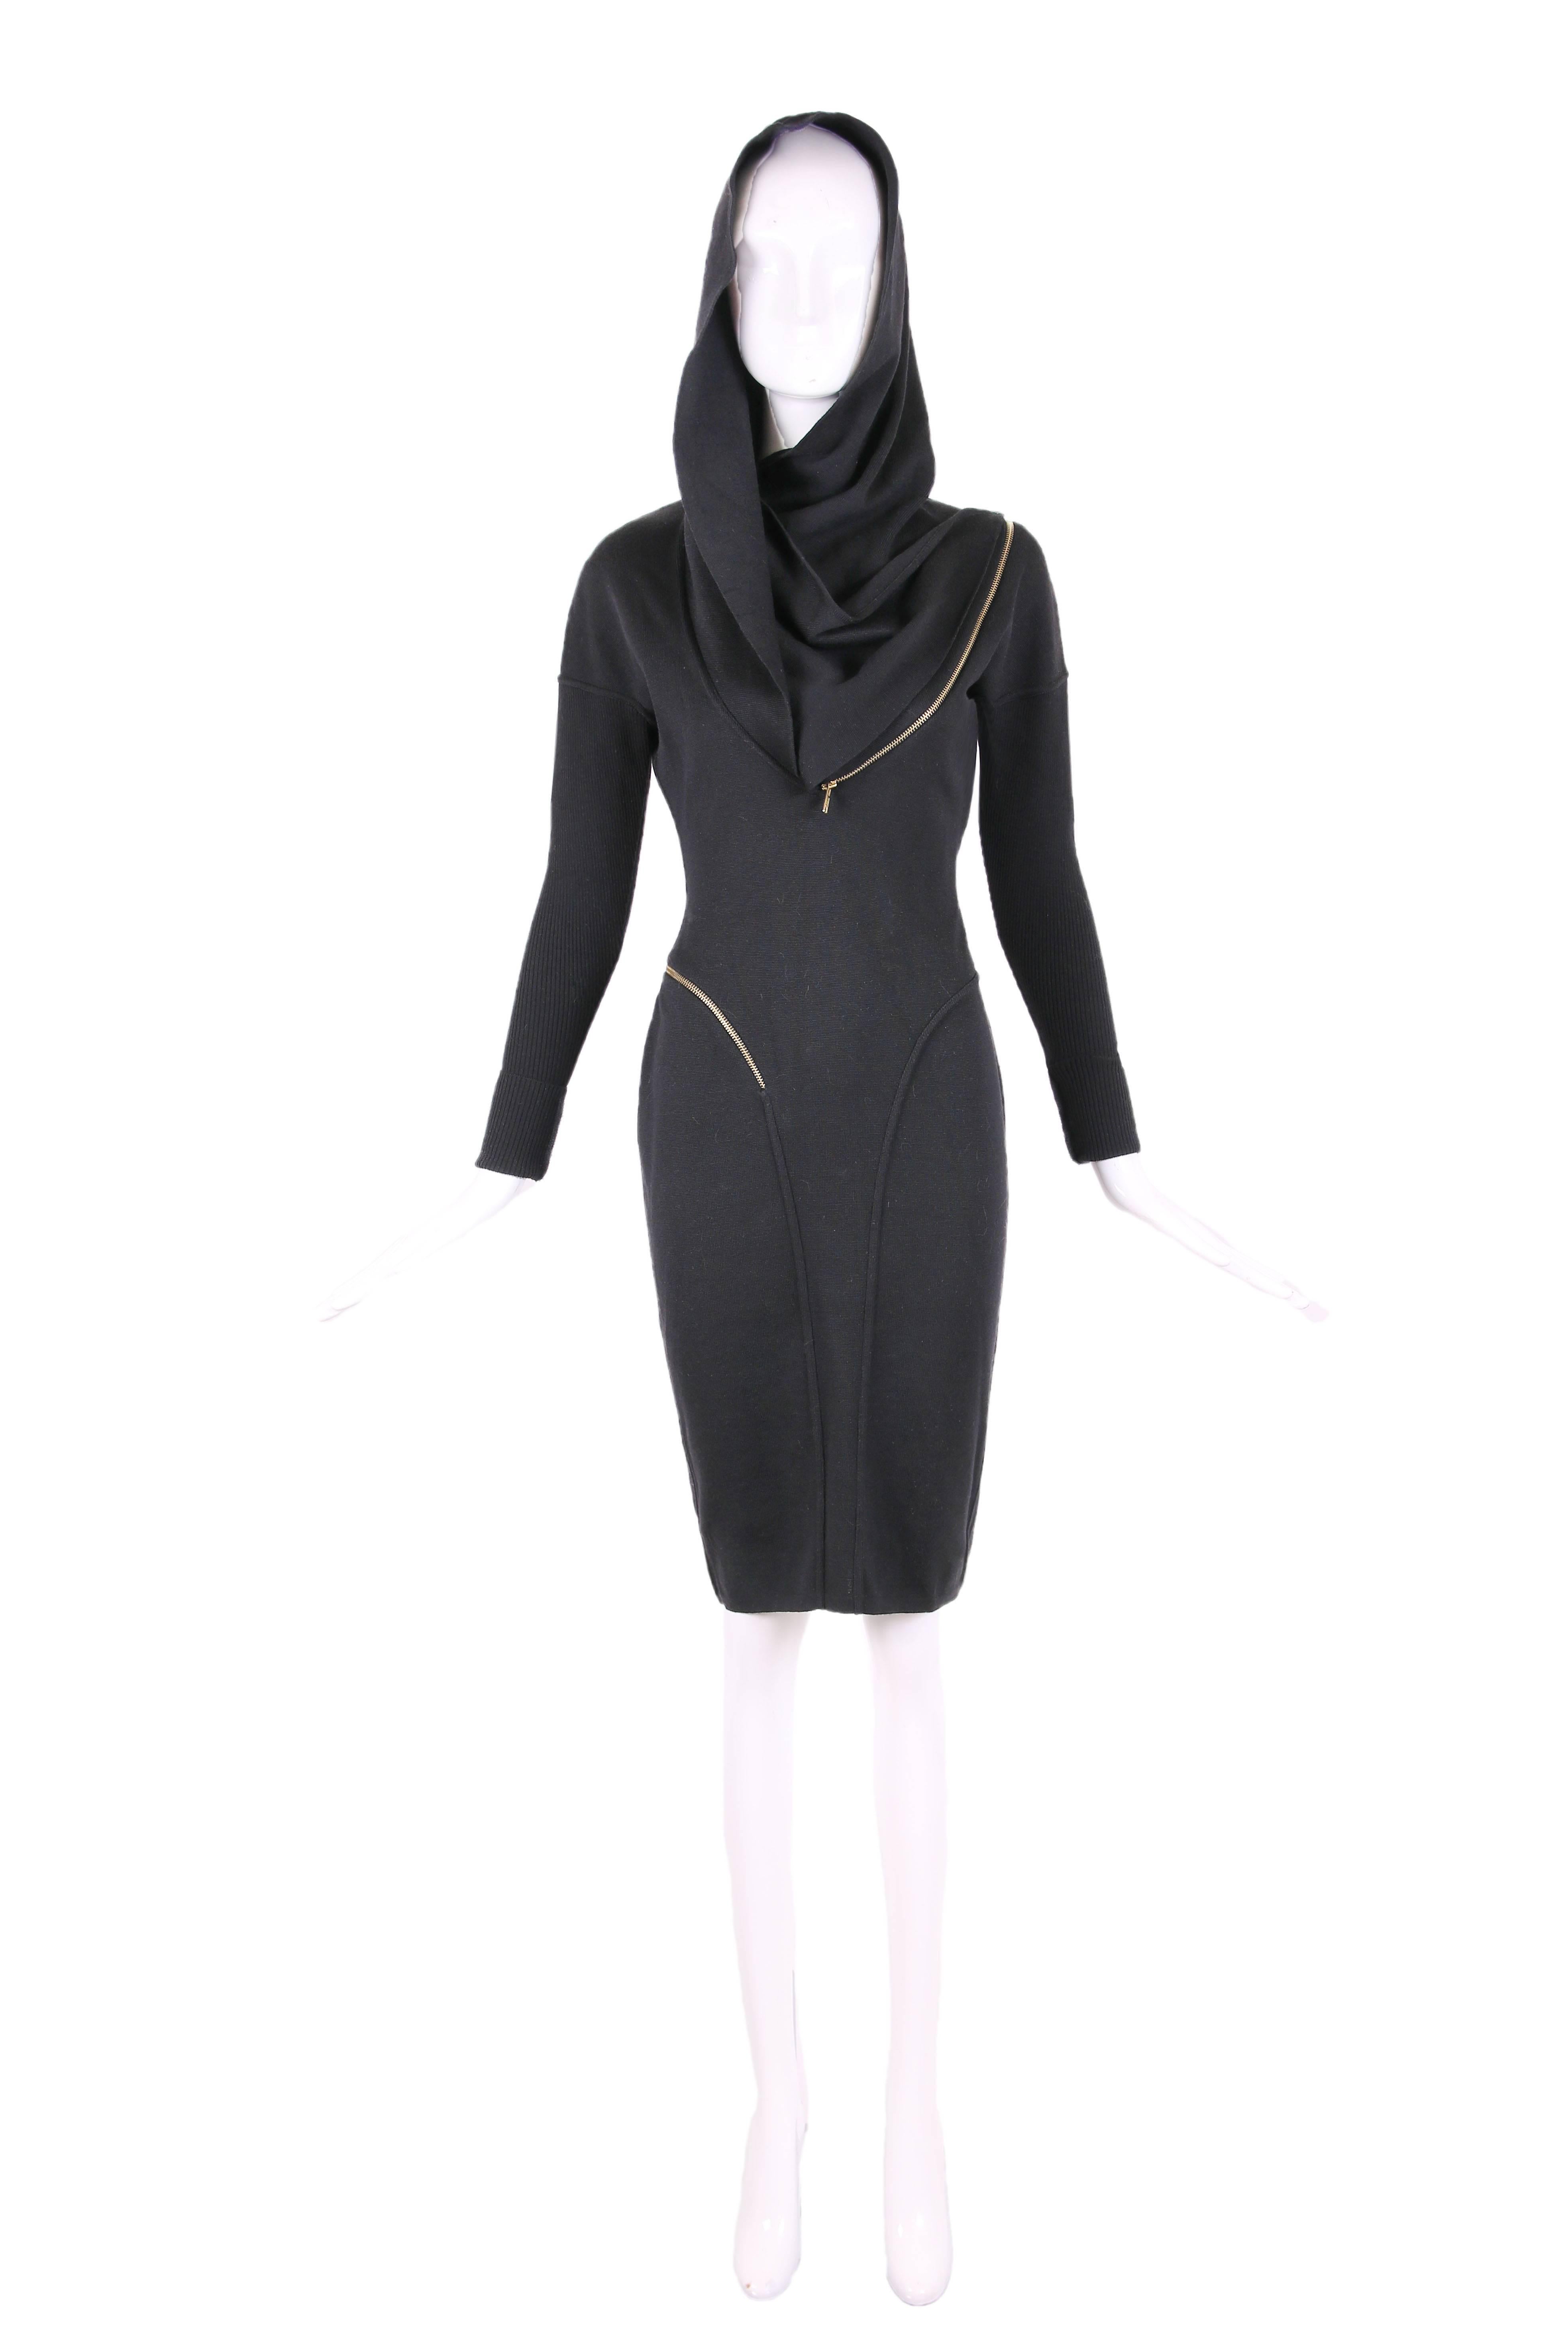 Iconic 1986 Azzedine Alaia black wool stretch hooded dress with zipper design. In excellent condition. Size tag Medium - please see measurements.